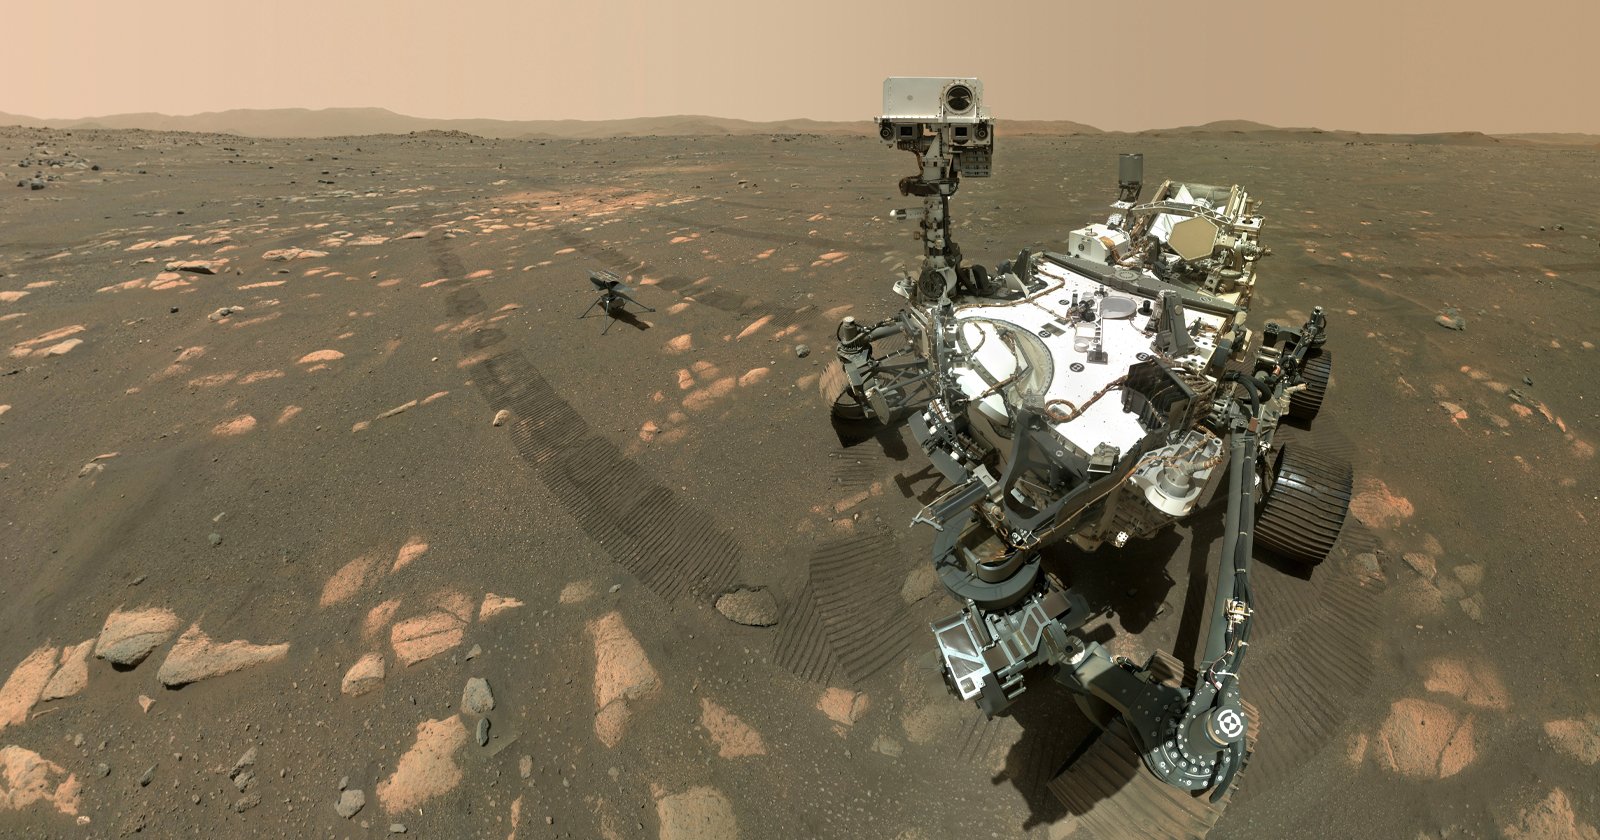 NASAs-Mars-Perseverance-Rover-Takes-Selfie-with-the-Ingenuity-Drone.jpg